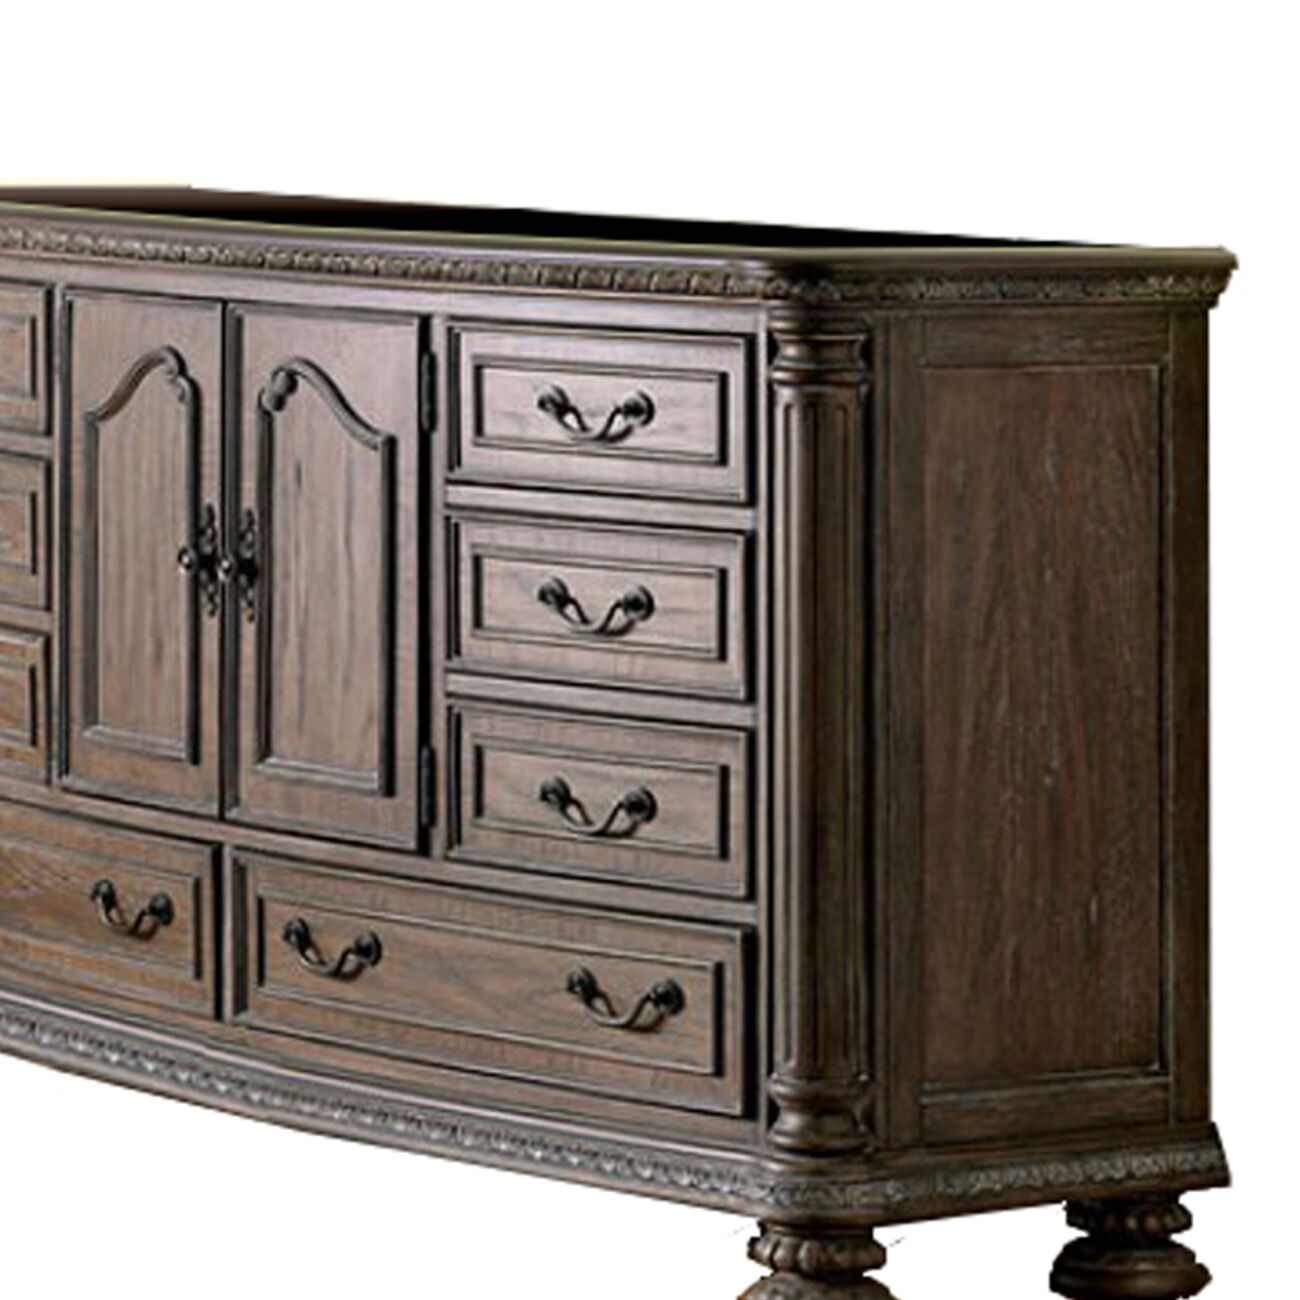 8 Drawers Wooden Dresser with Cabinet and Carving Details, Brown